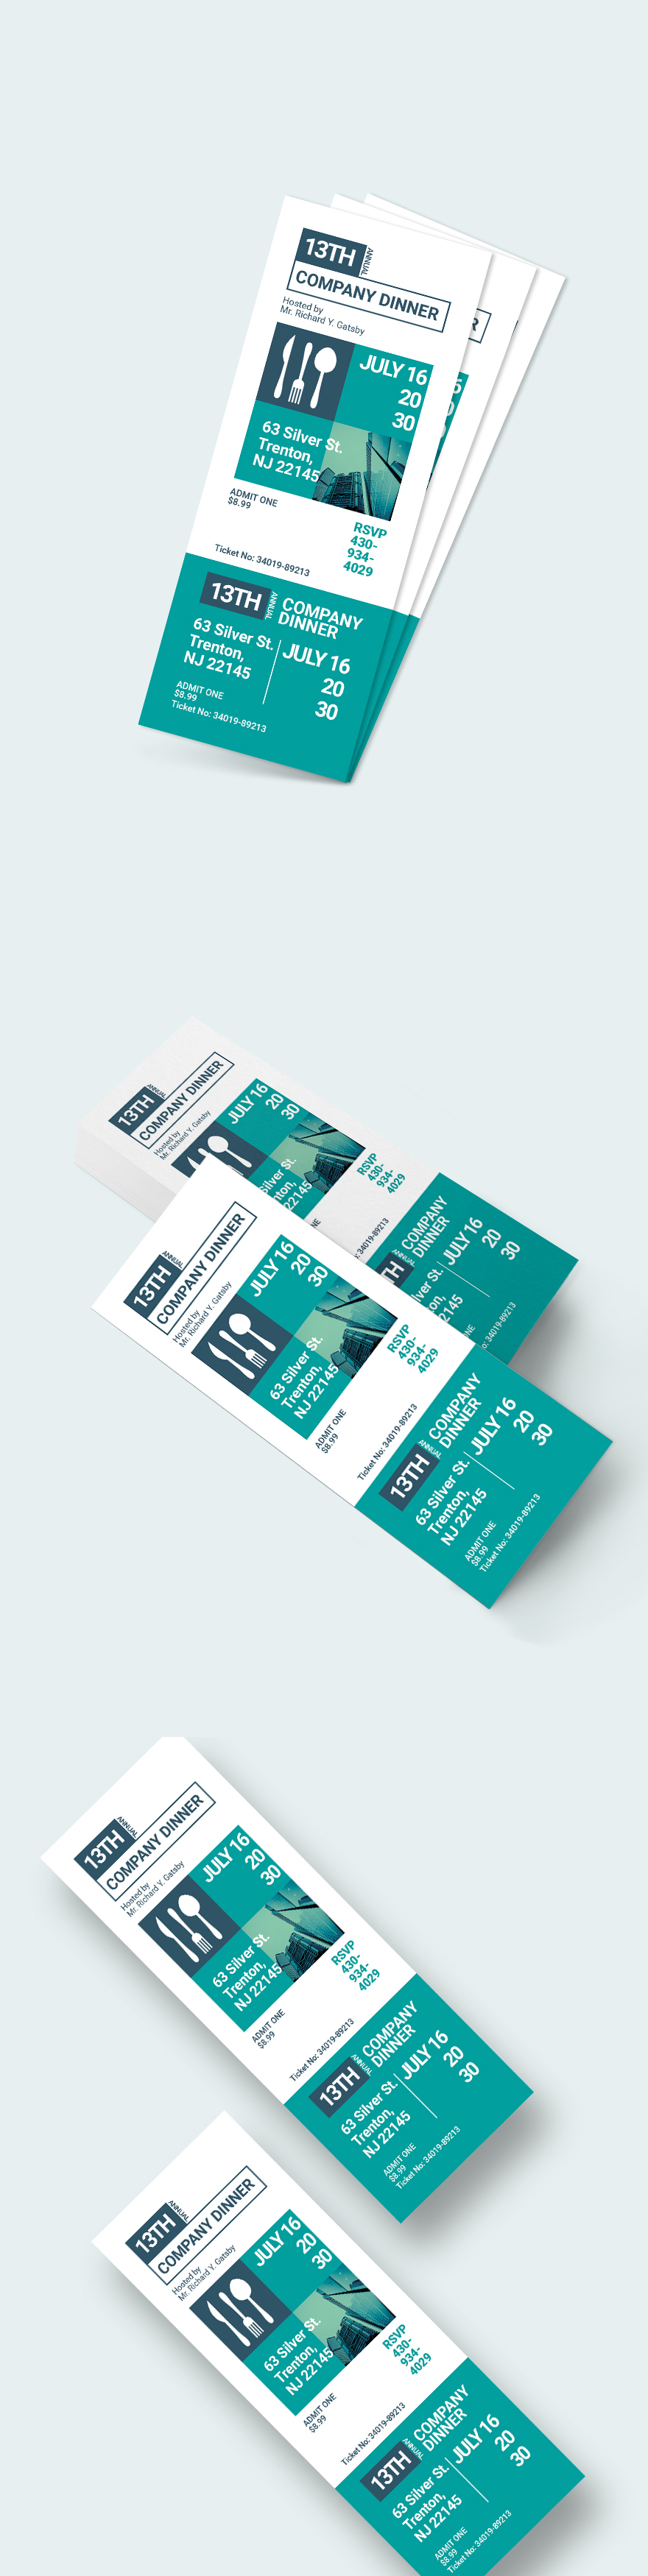 free-gala-dinner-ticket-template-illustrator-word-apple-pages-psd